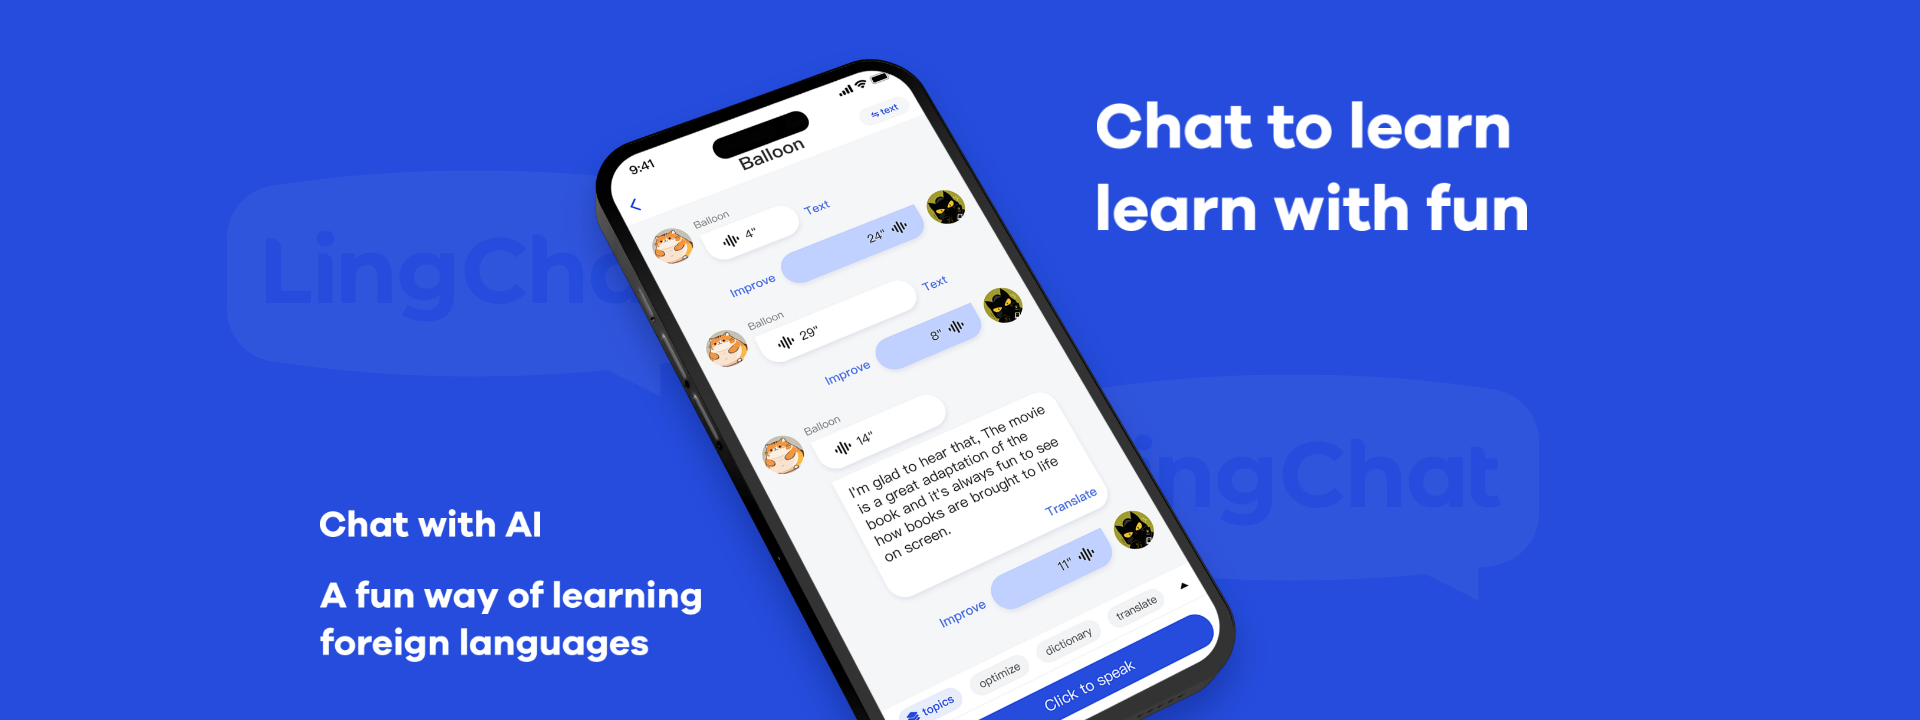 Chat to learn learn with fun